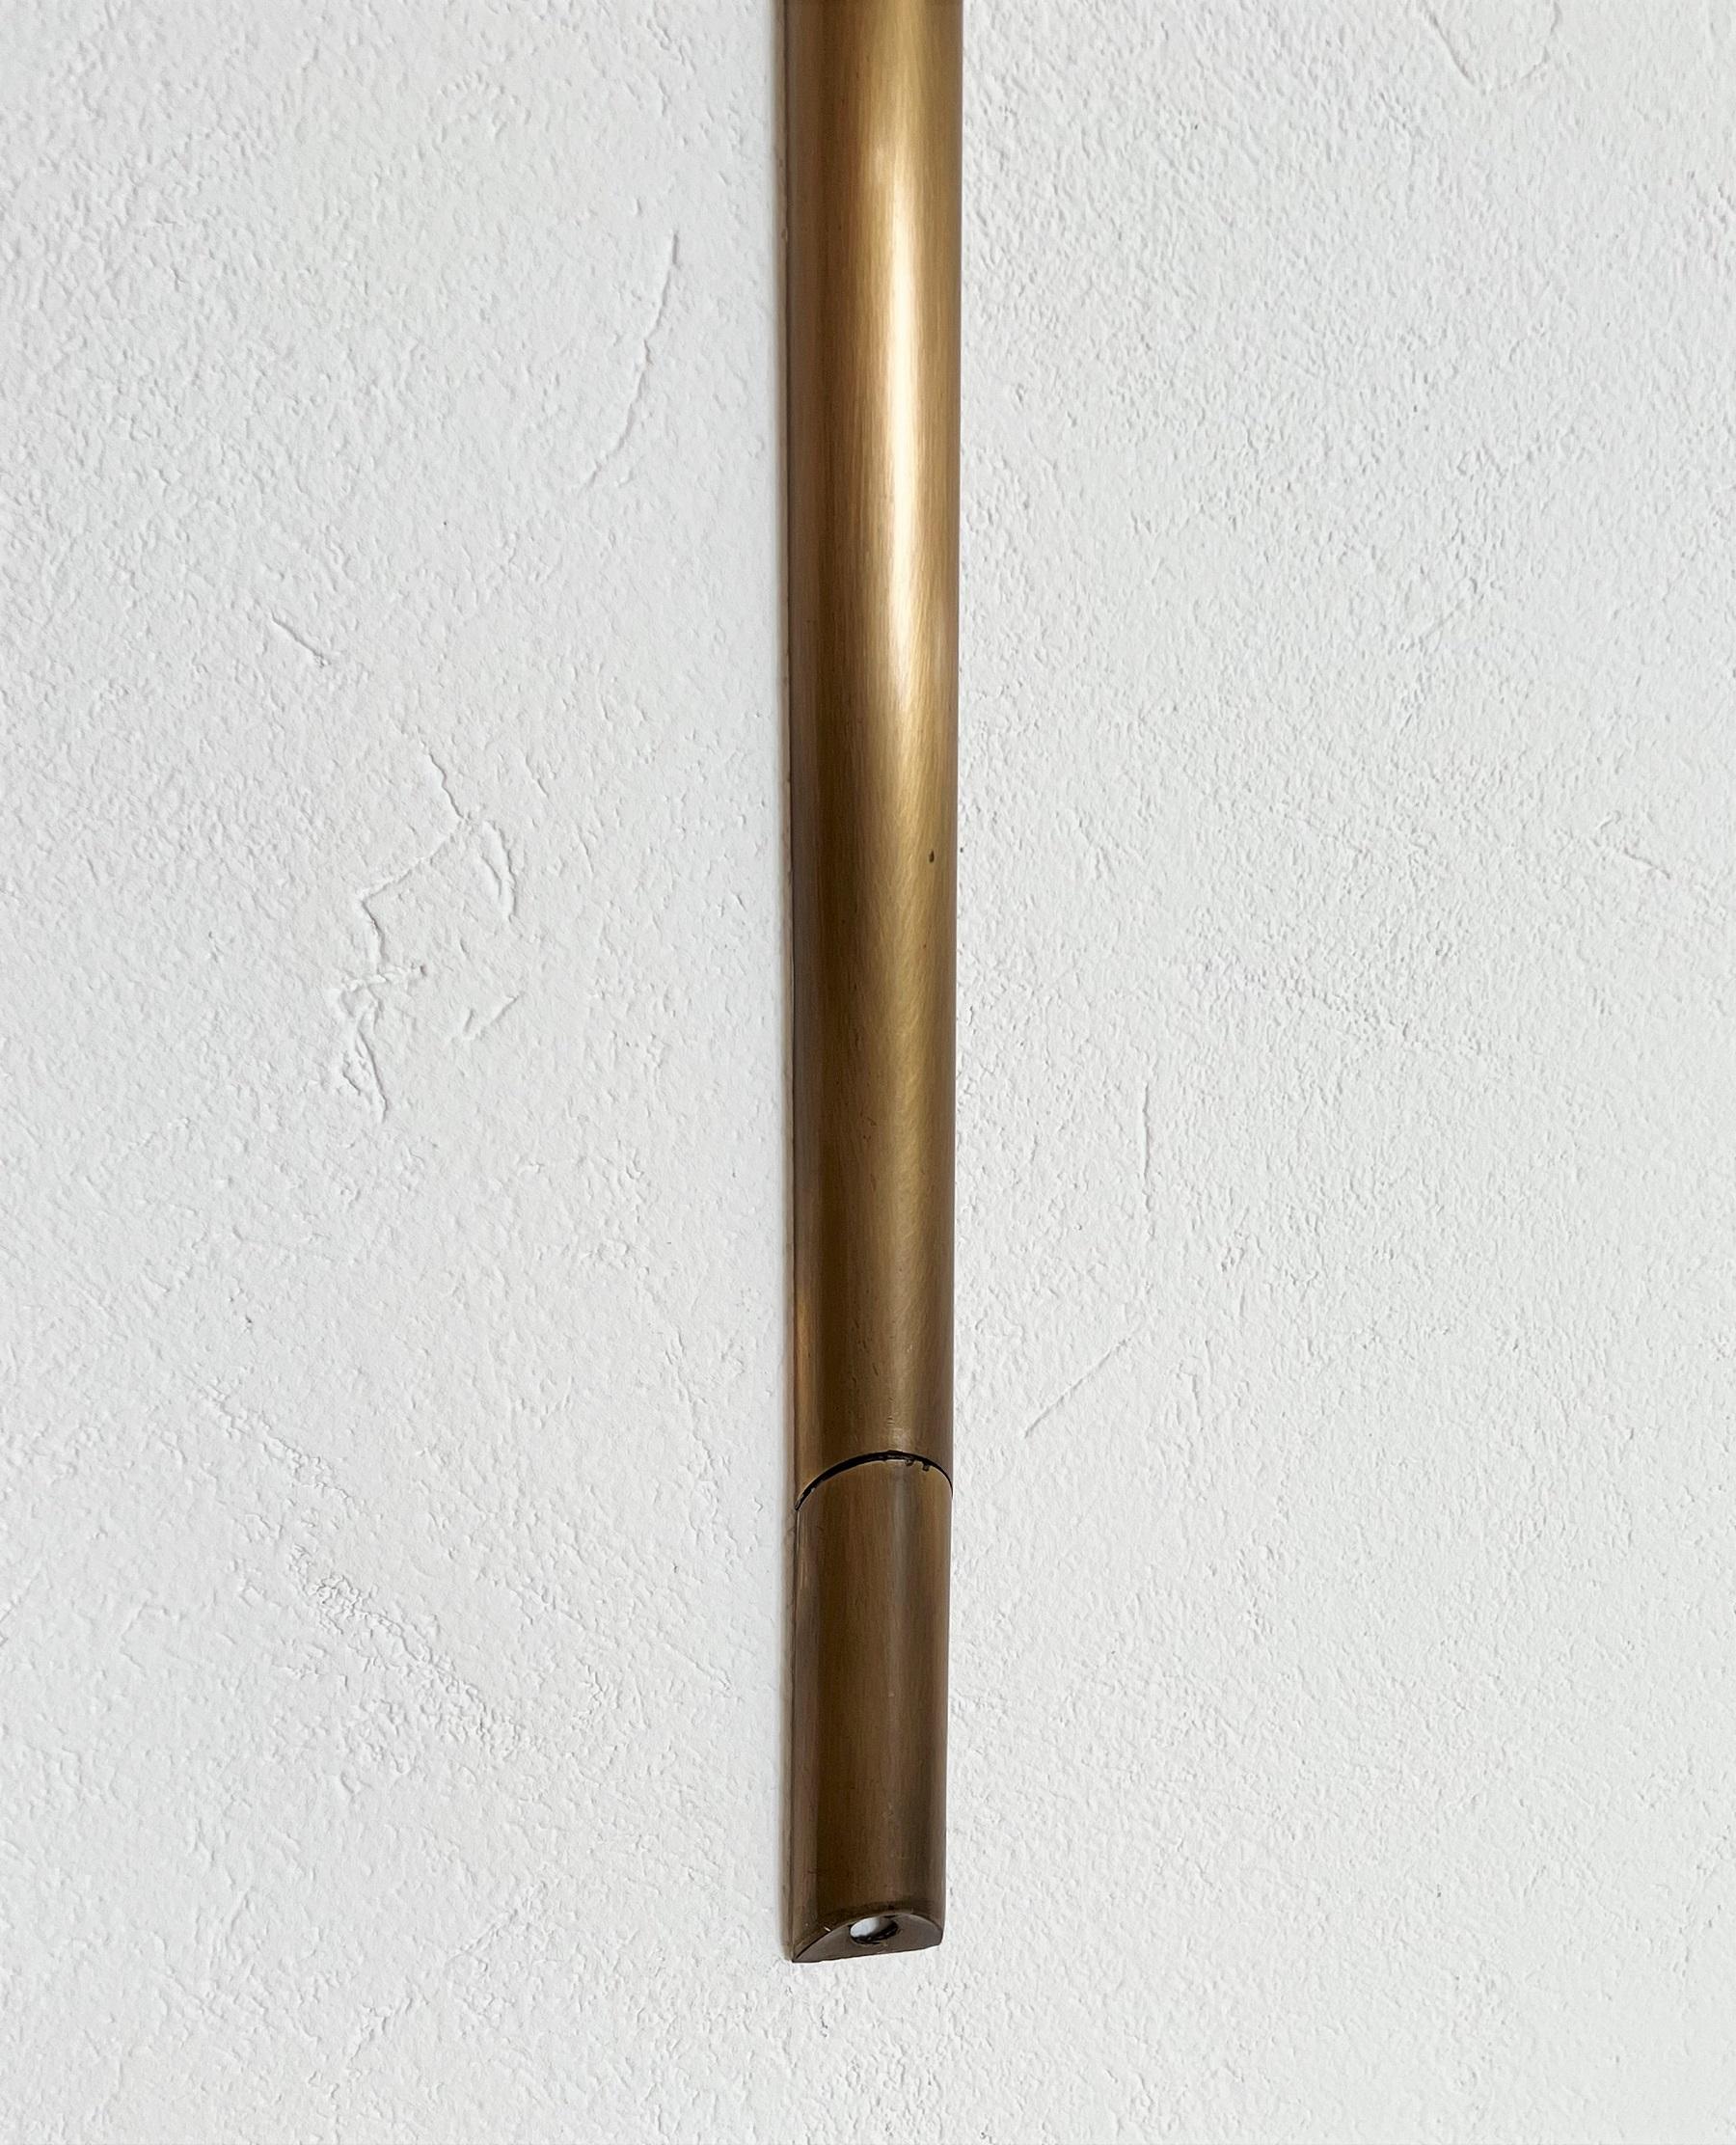 Florian Schulz Vintage Wall Sconce in Brushed Brass, 1970s For Sale 3